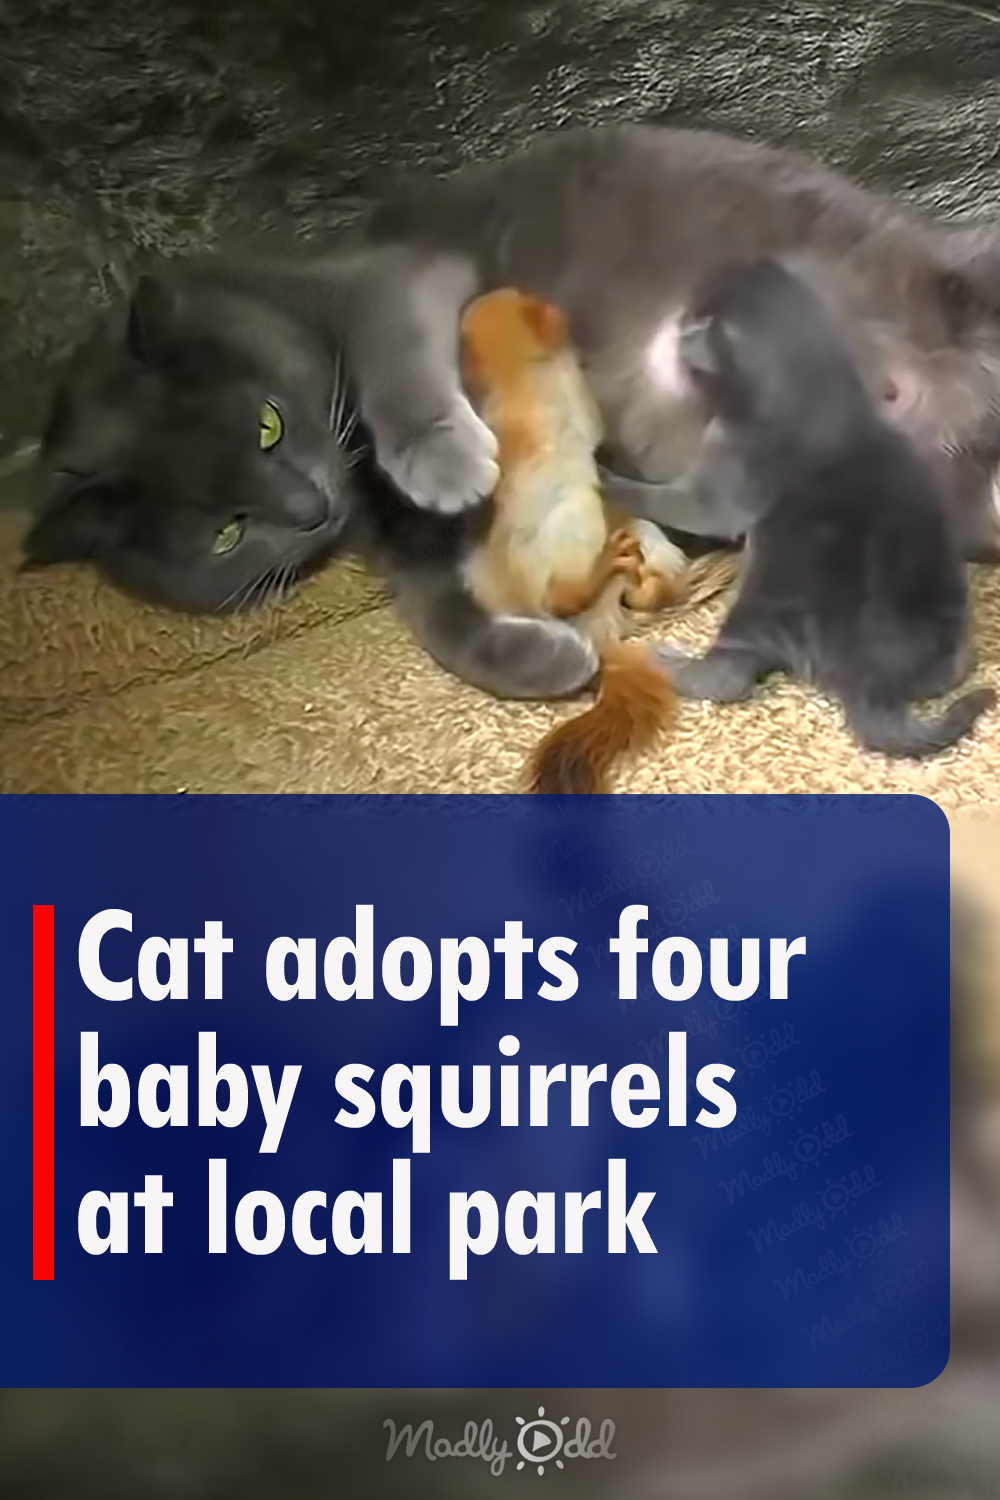 Cat adopts four baby squirrels at local park